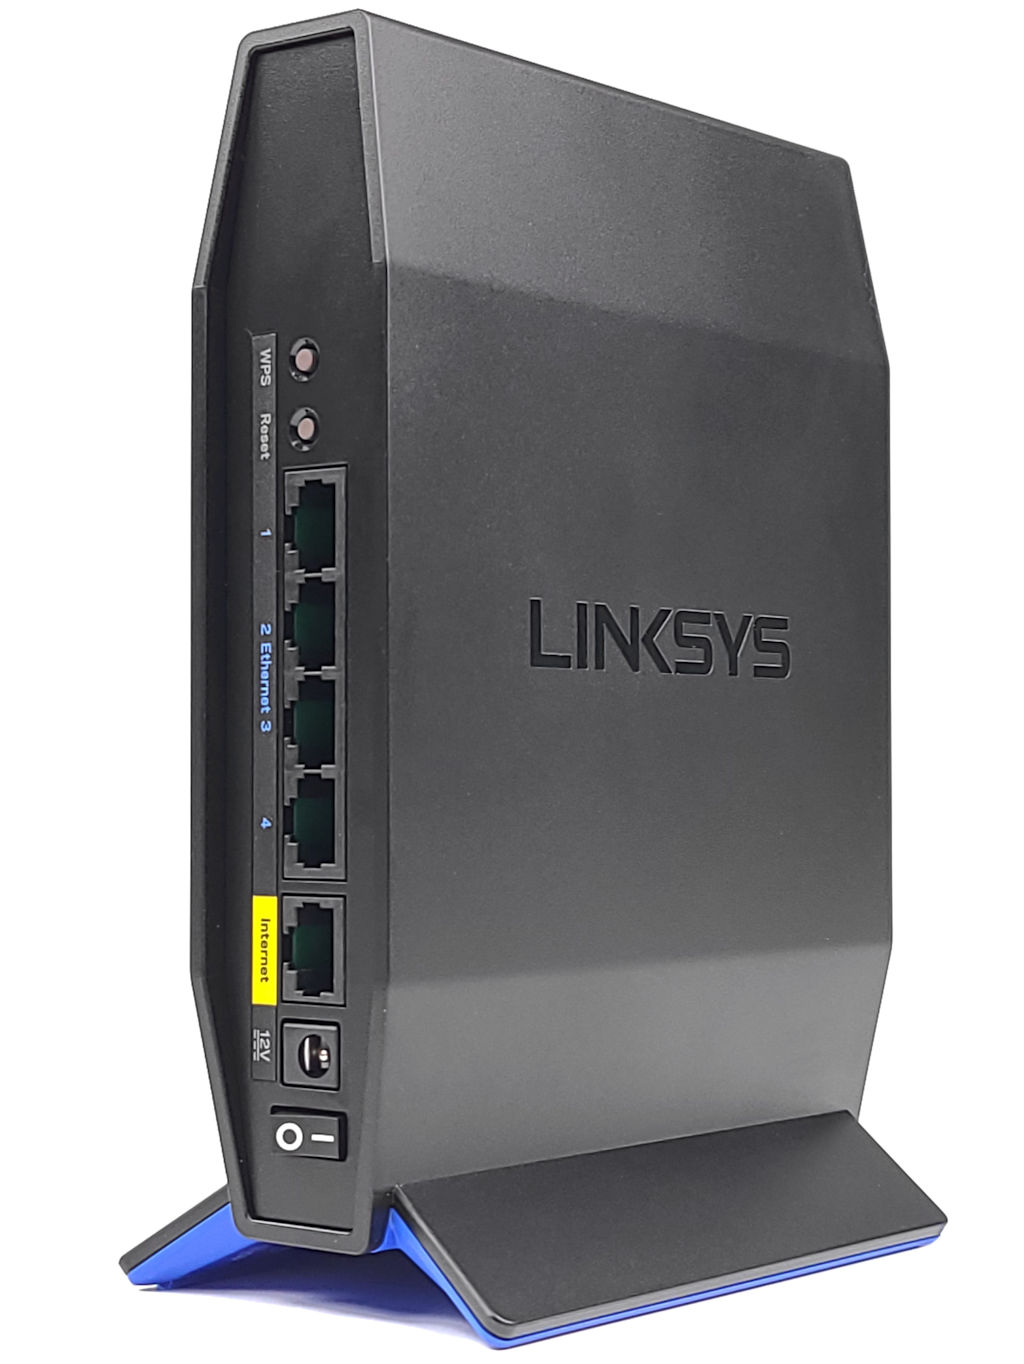 LINKSYS E5600 AC1200 Router 開箱